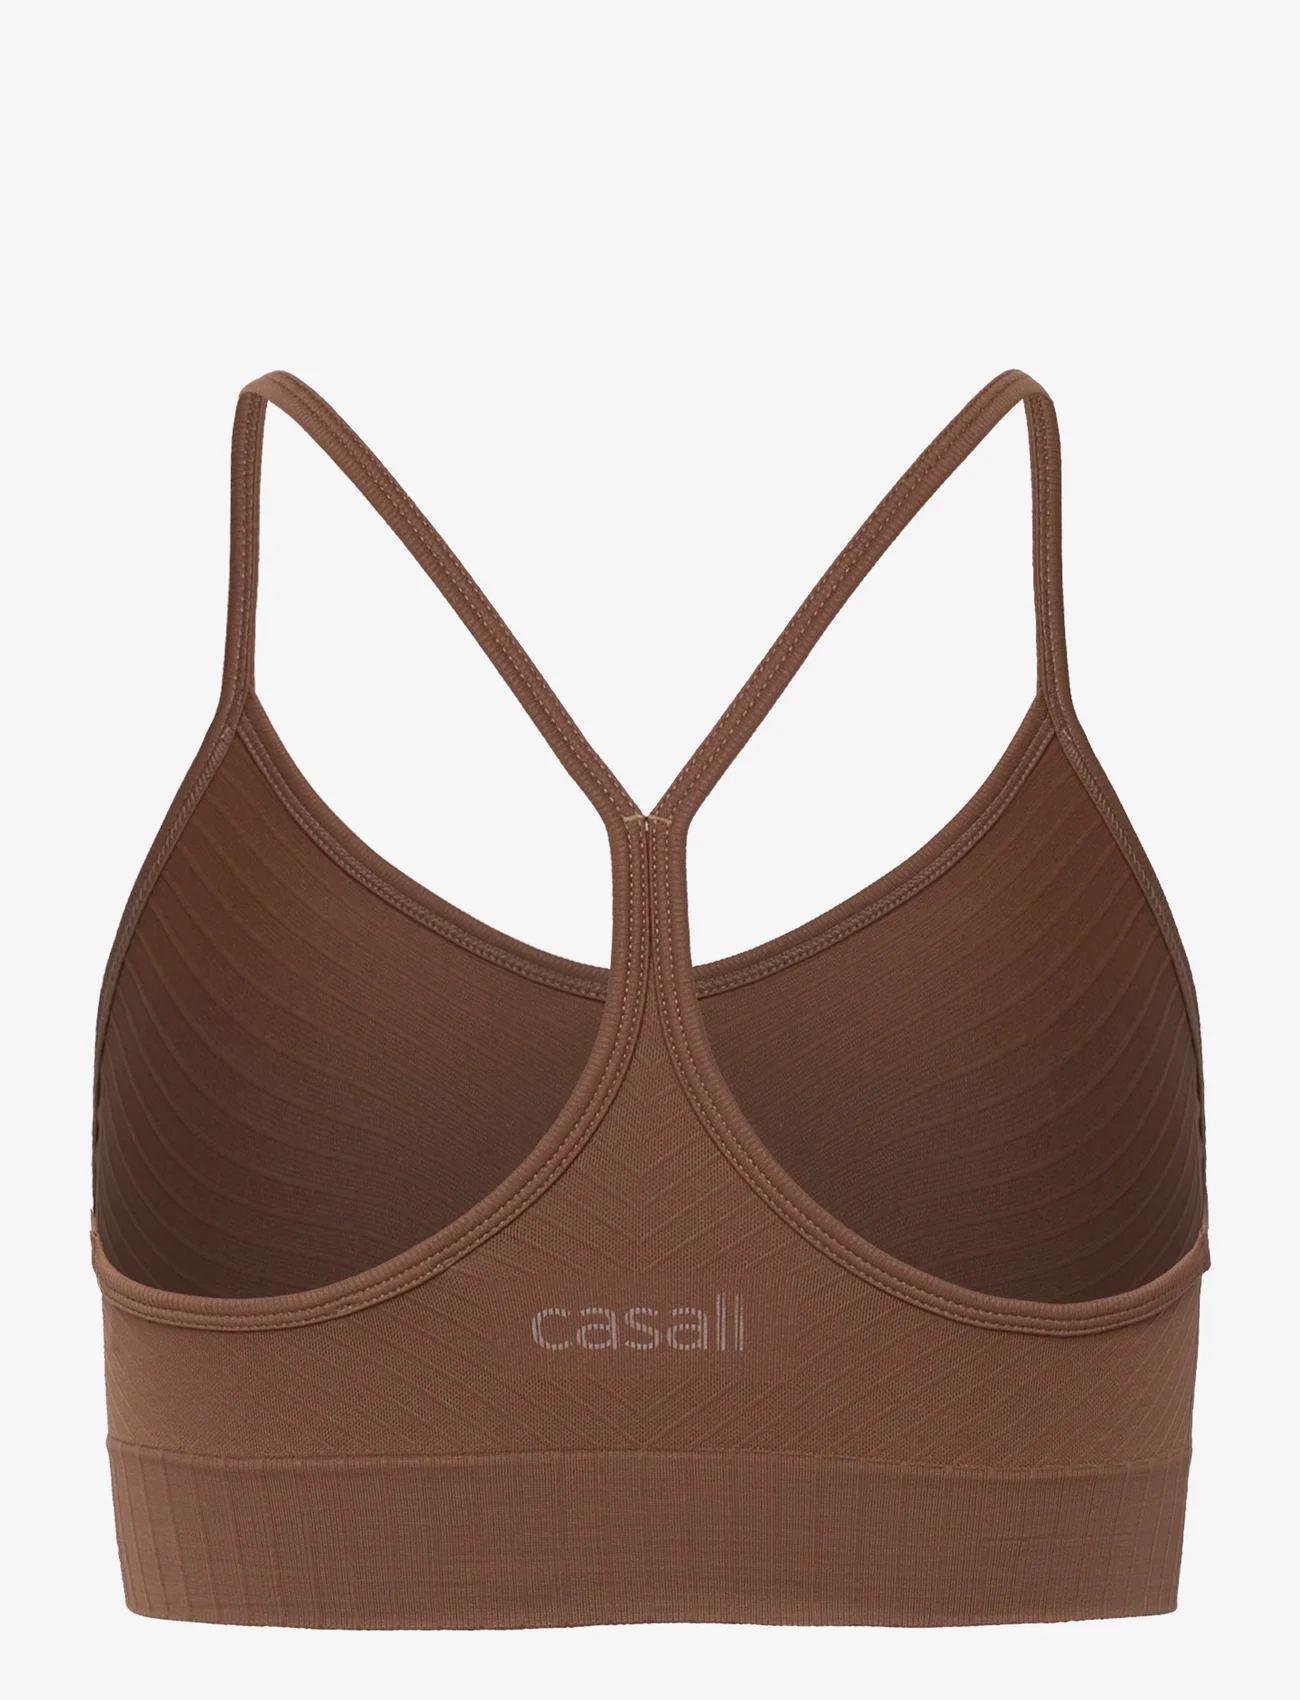 Casall - Seamless Graphical Rib Sports Top - sport-bhs - taupe brown - 1